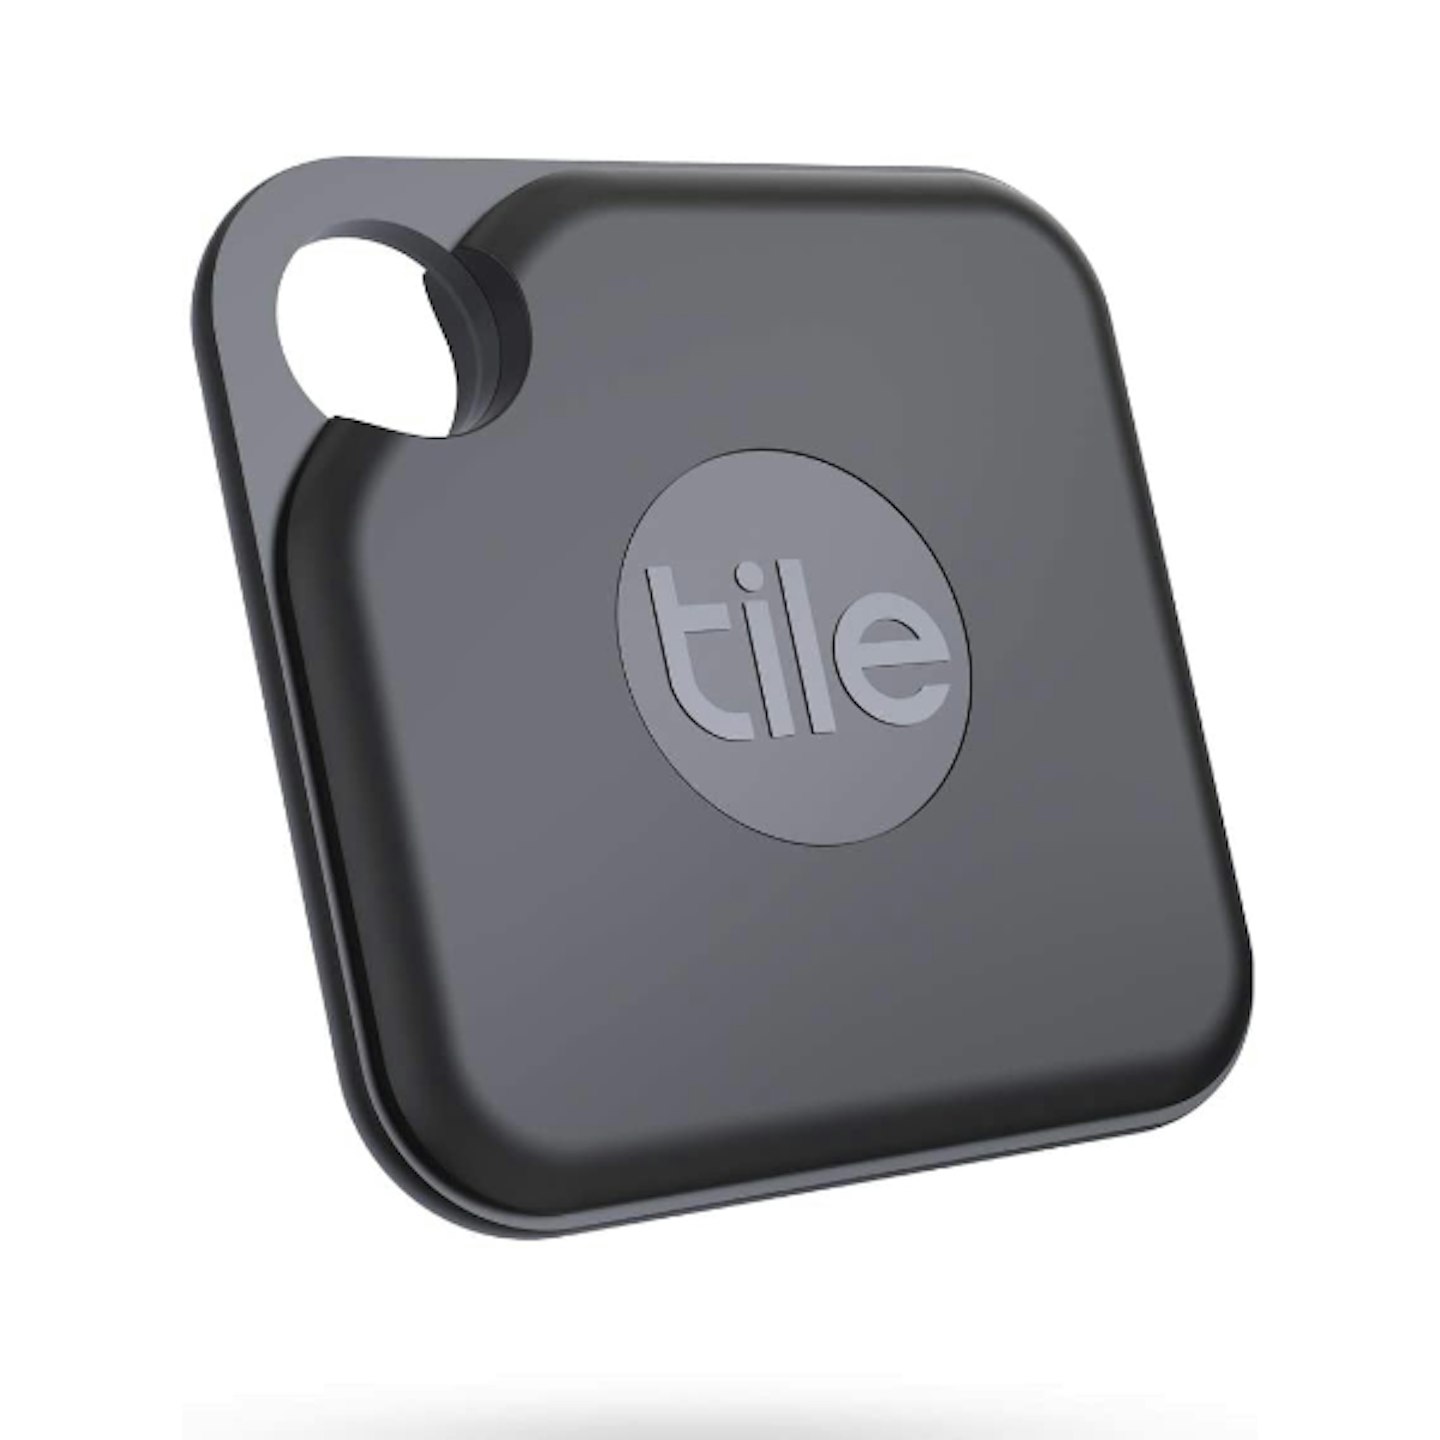 Up to 25% off Selected Tile Item Finders